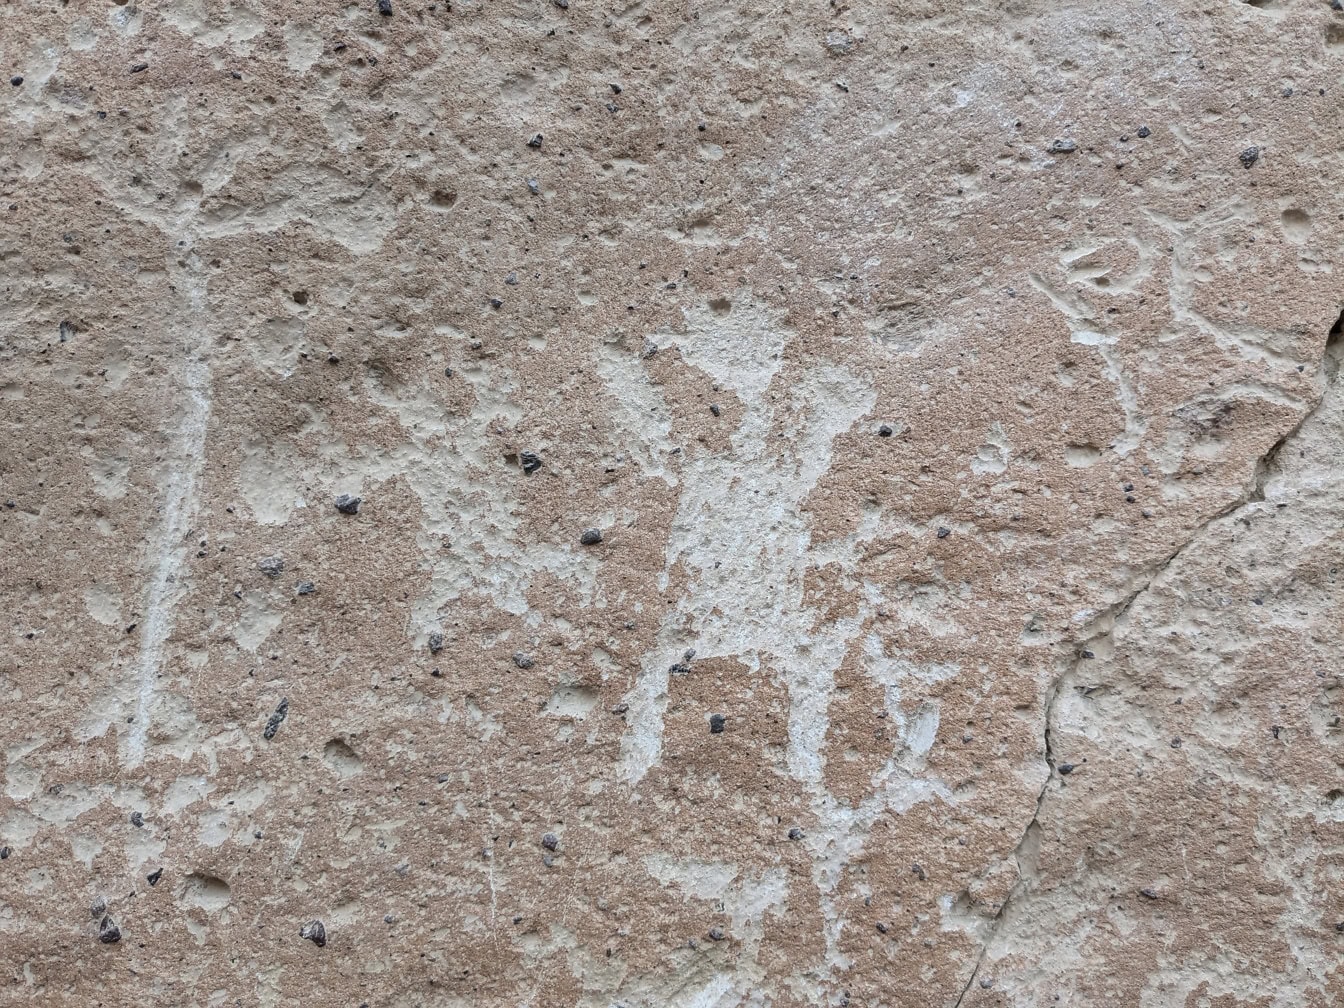 Close-up of a rock with a petroglyph carved into a stone in Peru, a stone-age art